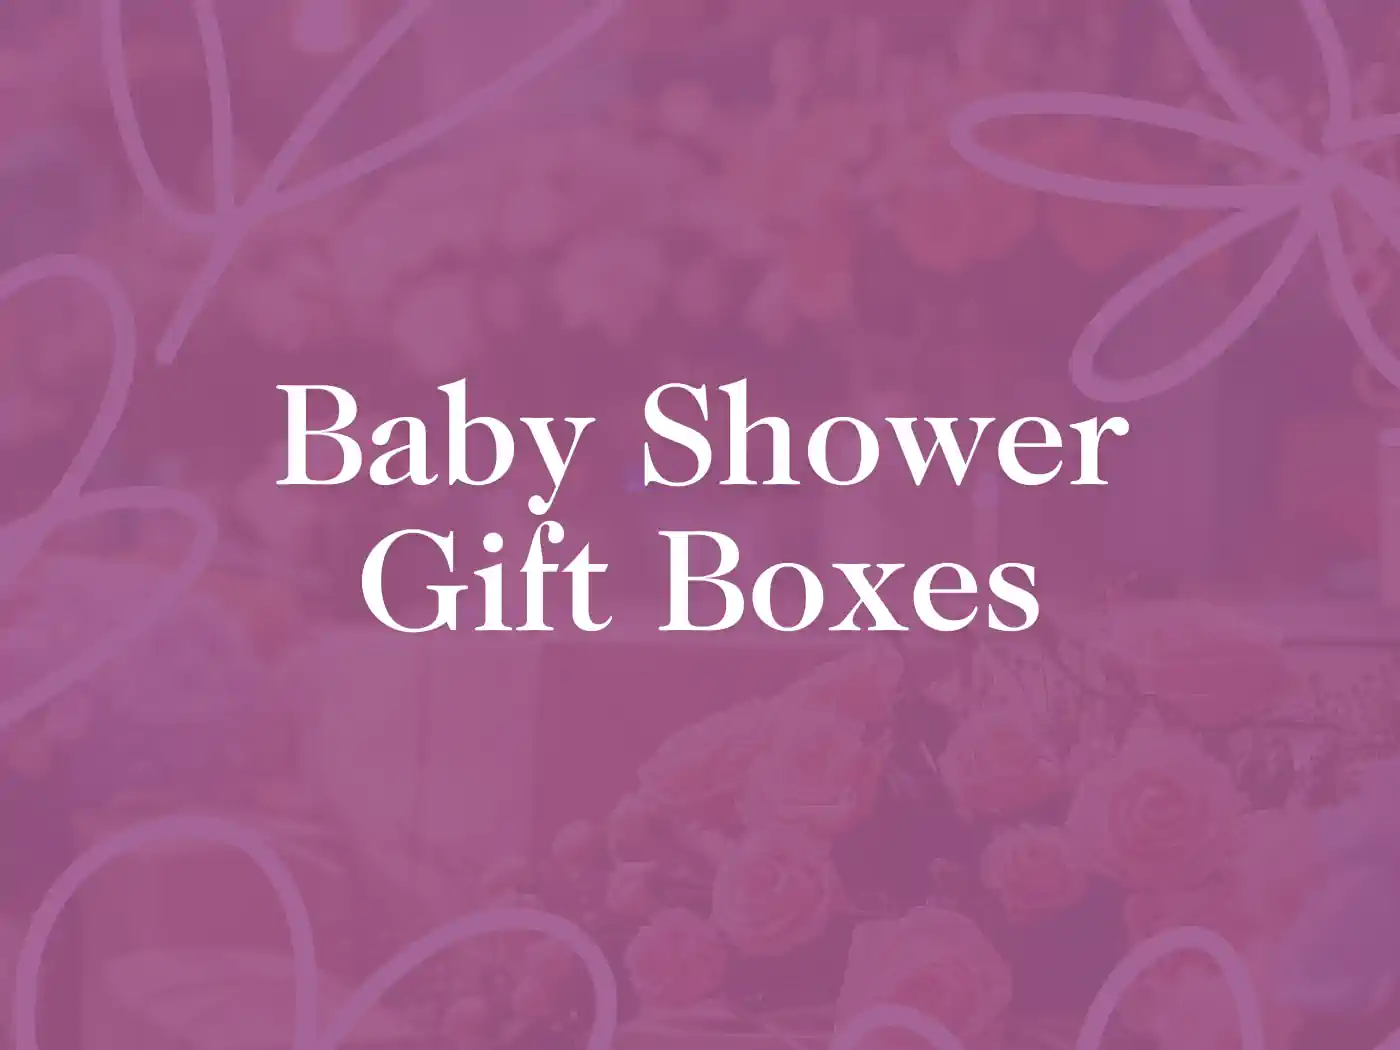 Baby Shower Gift Boxes Collection with Fabulous Flowers and Gifts - Perfect for Celebrating New Arrivals.